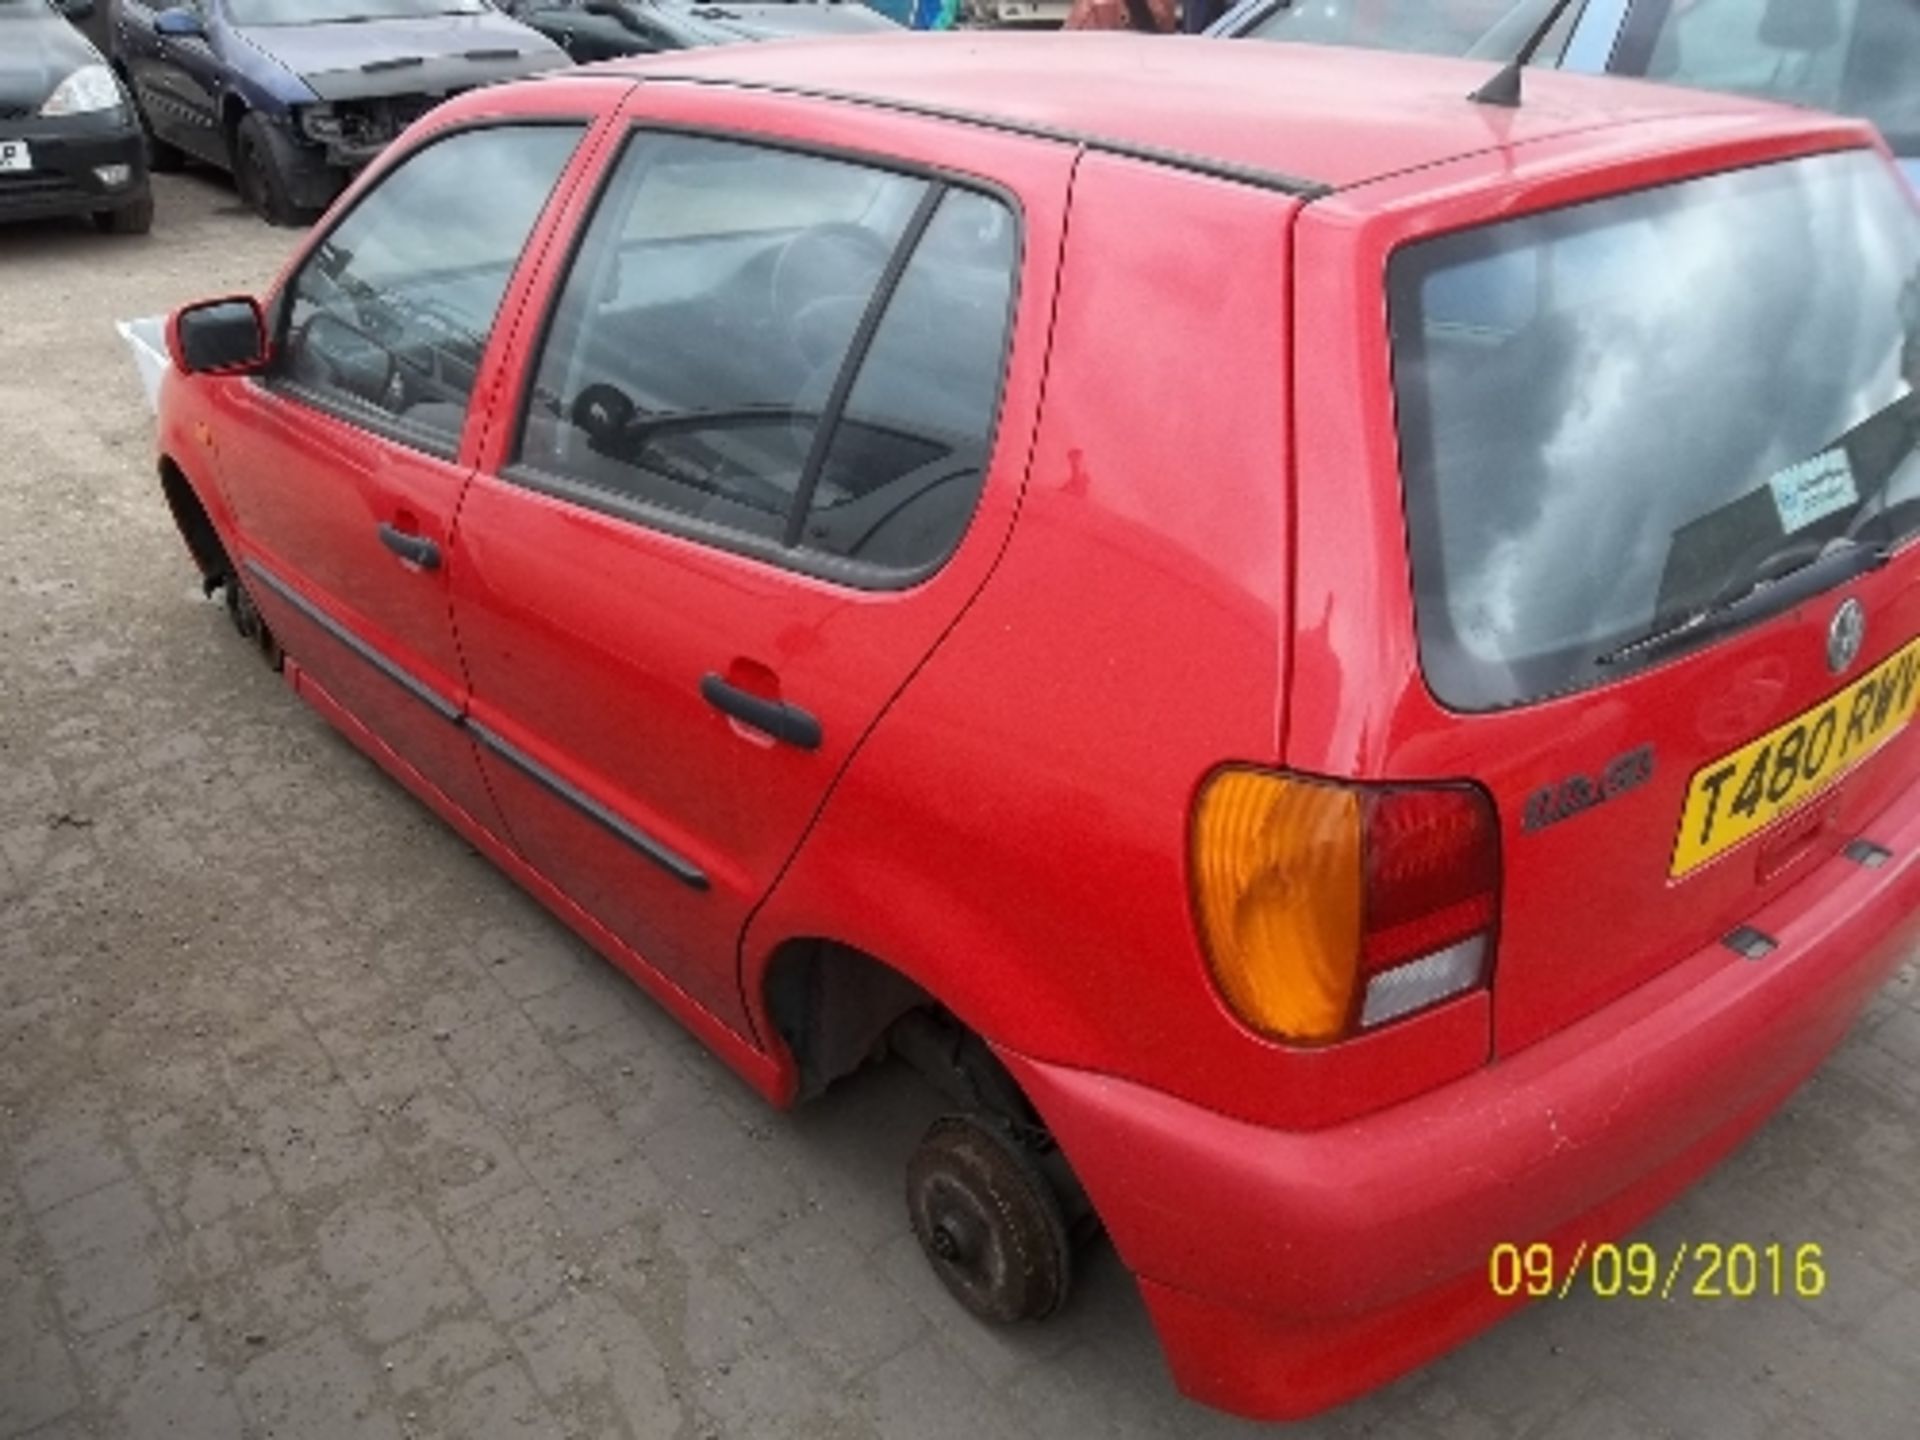 Volkswagen Polo 1.4 CL - T480 RWV Date of registration: 02.03.1999 1390cc, petrol, manual, red - Image 4 of 4